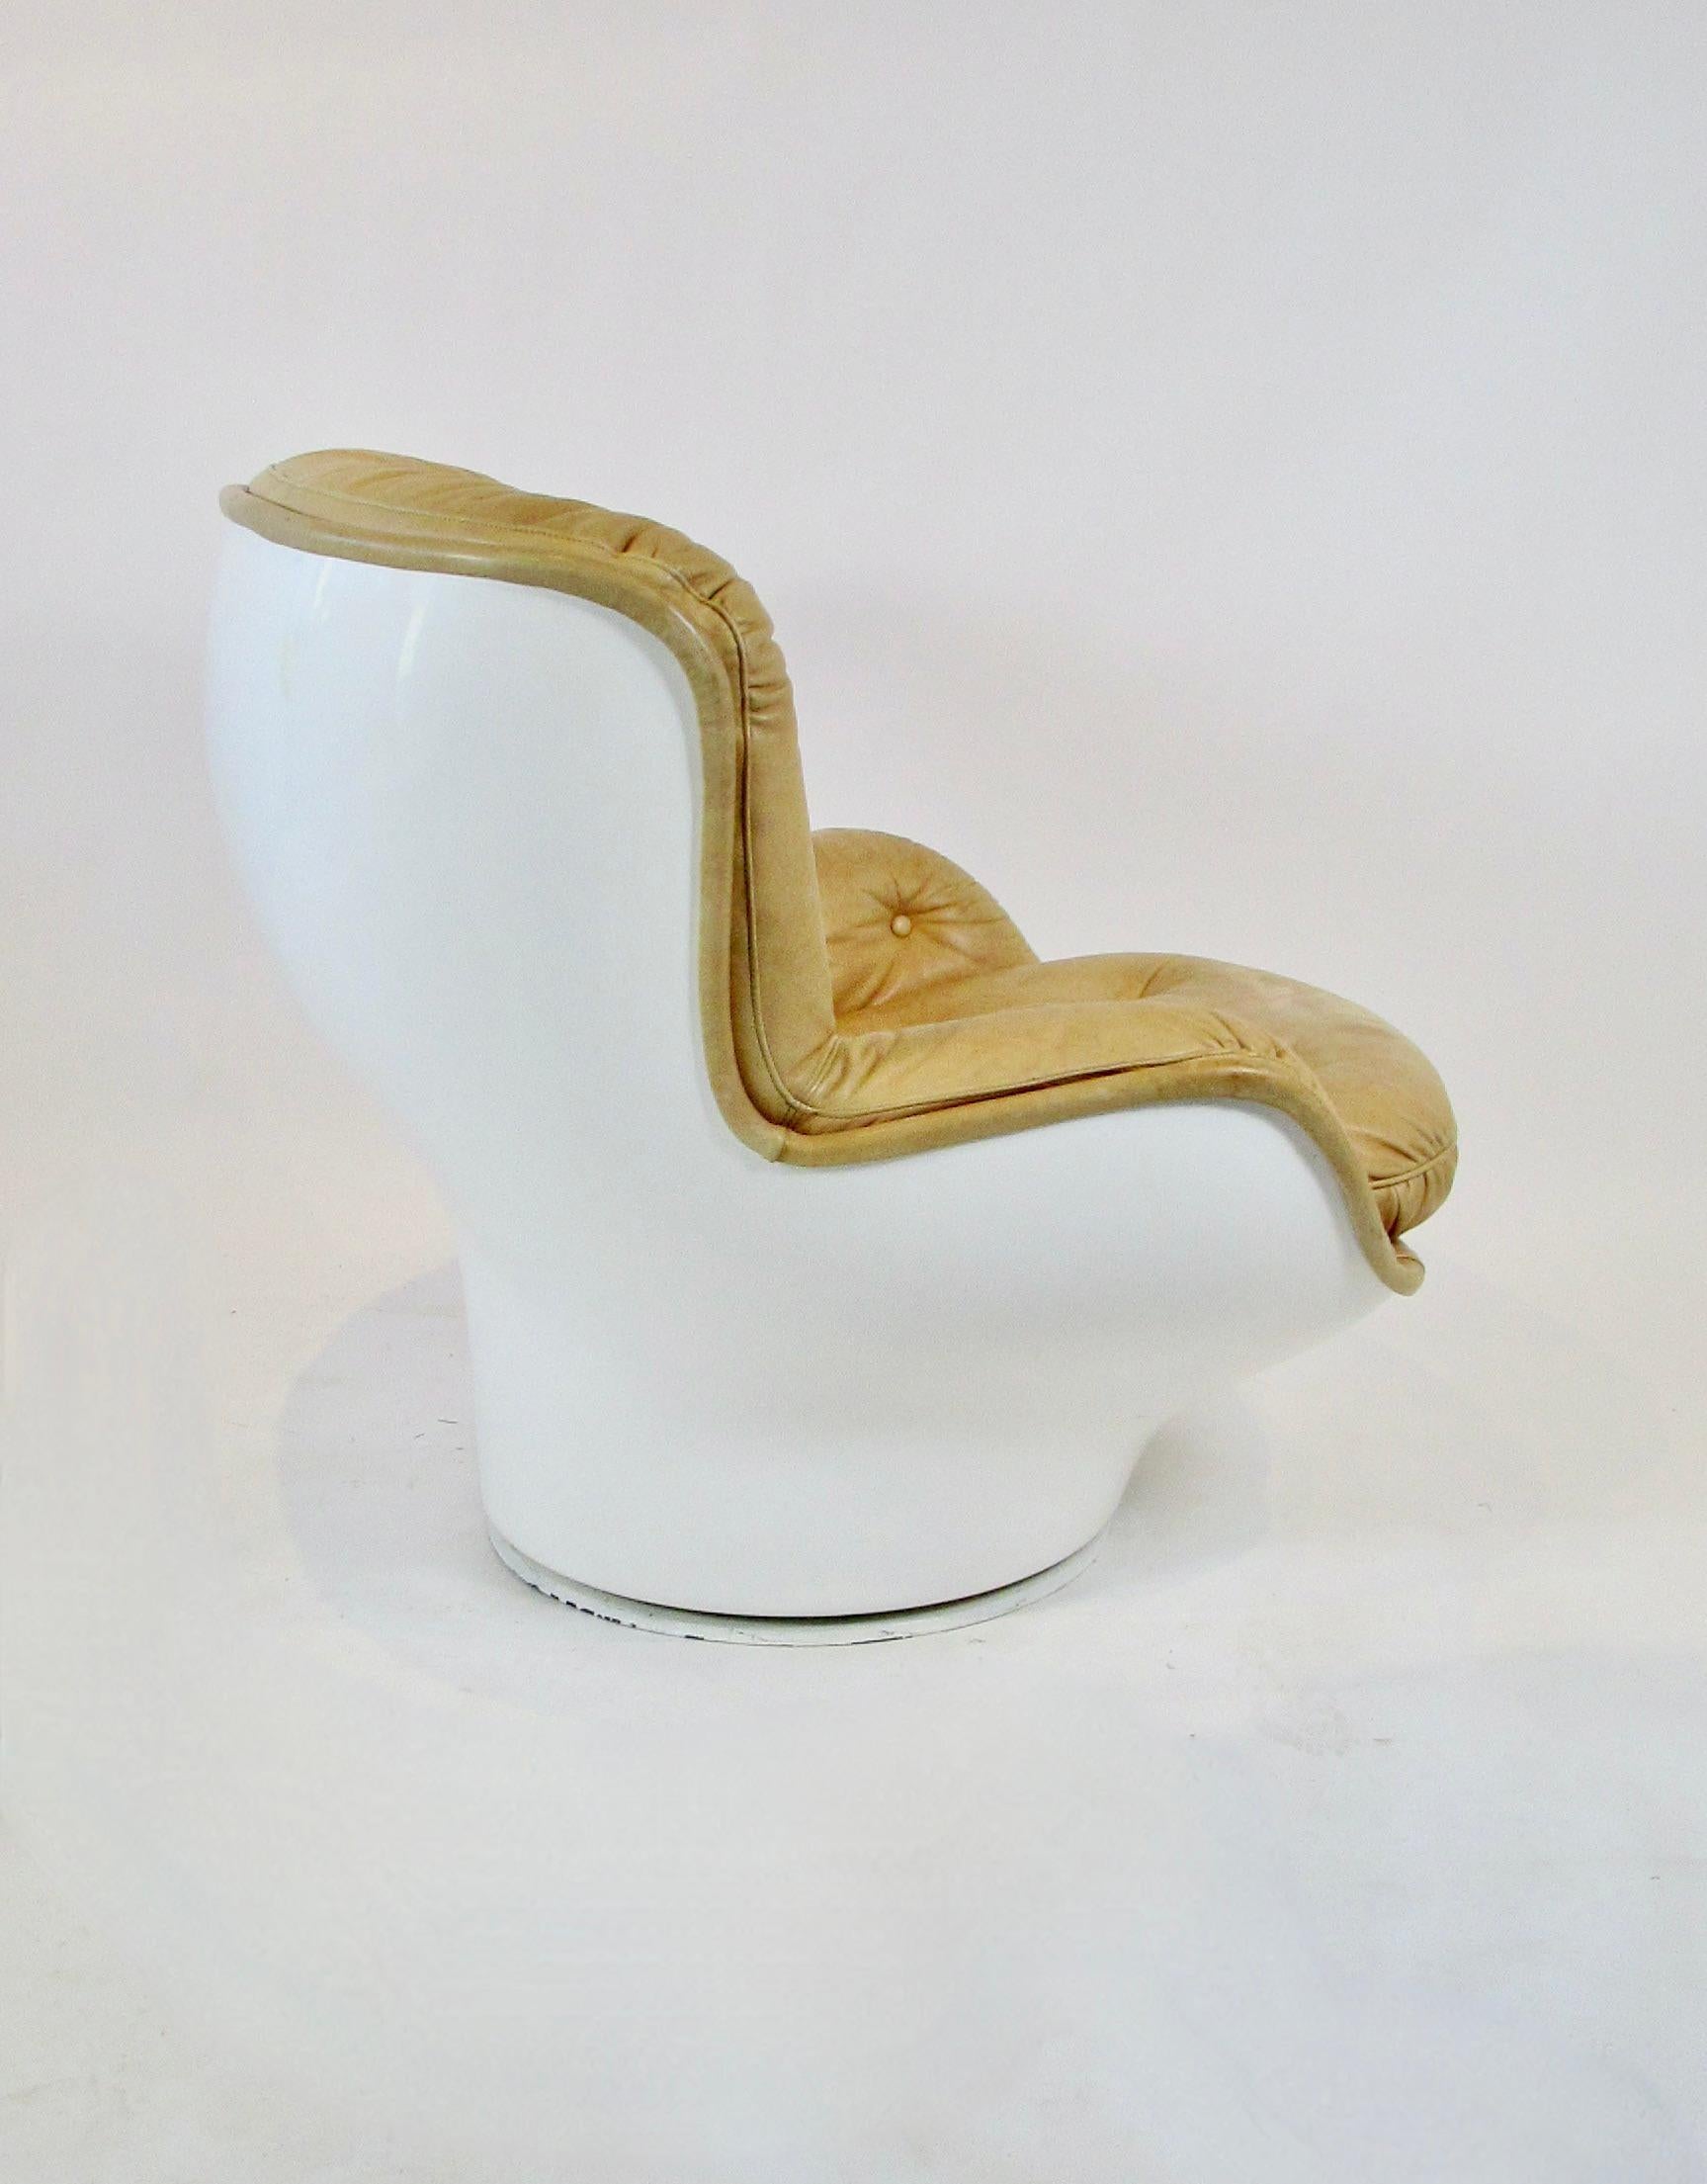 Michel Cadestin for Airborne White Fiberglass with Leather Lounge Chair Ottoman In Good Condition For Sale In Ferndale, MI